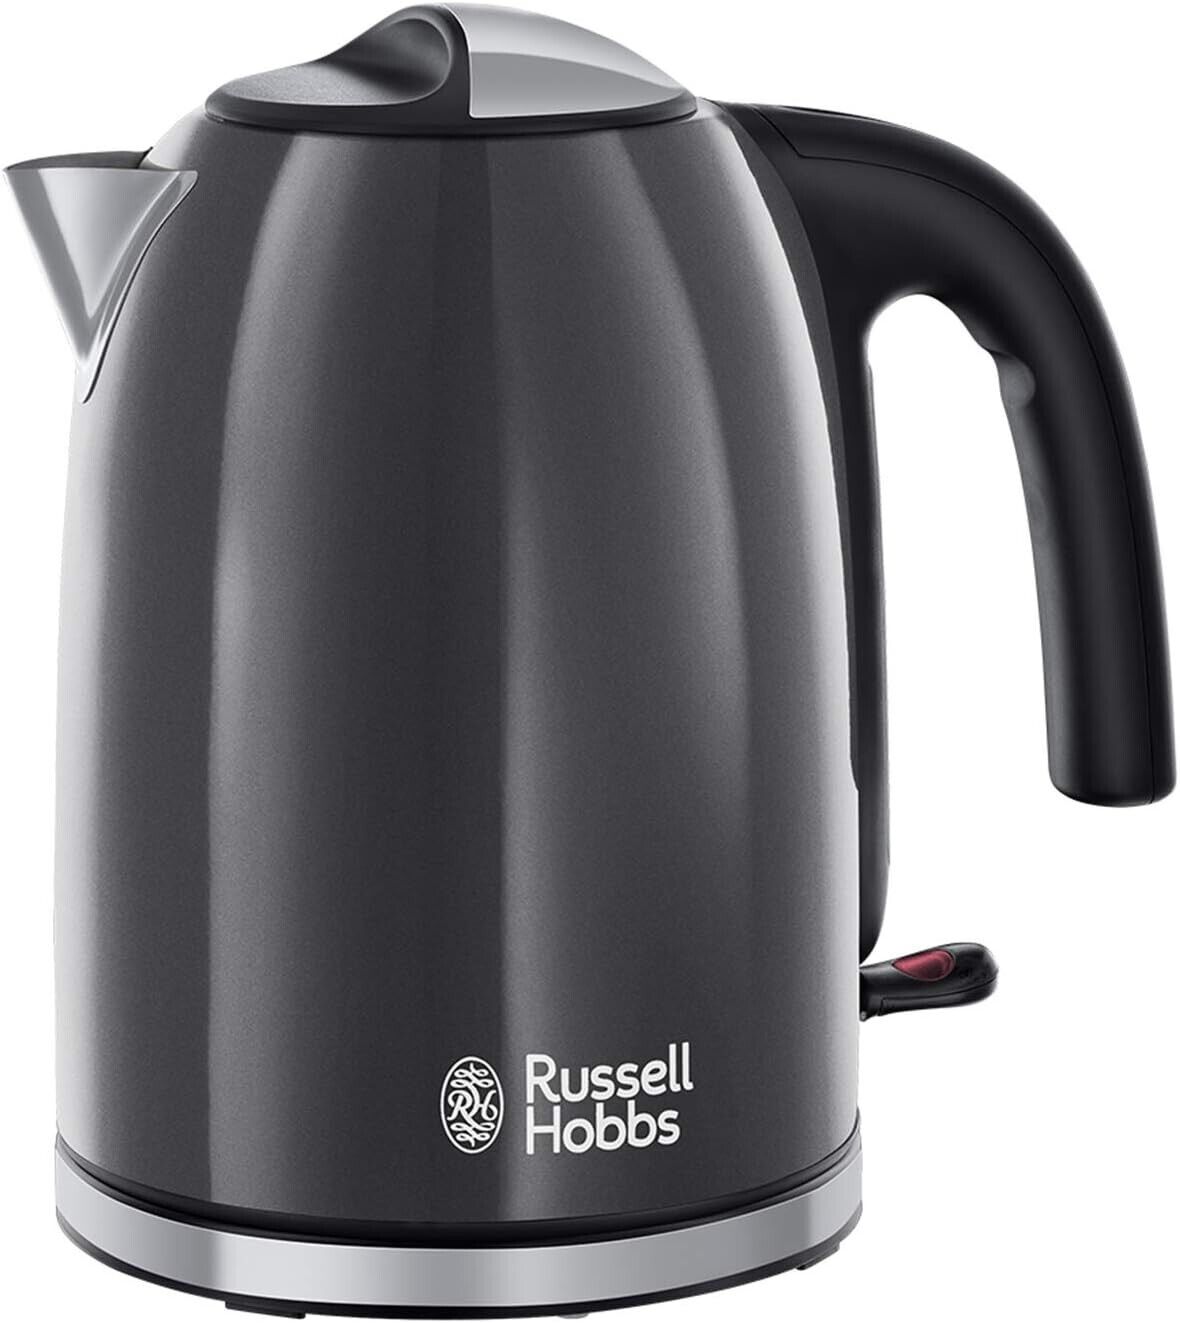 Russell Hobbs Colours Plus Grey 3KW 1.7L Jug Kettle 20414 - 3 Year Guarantee